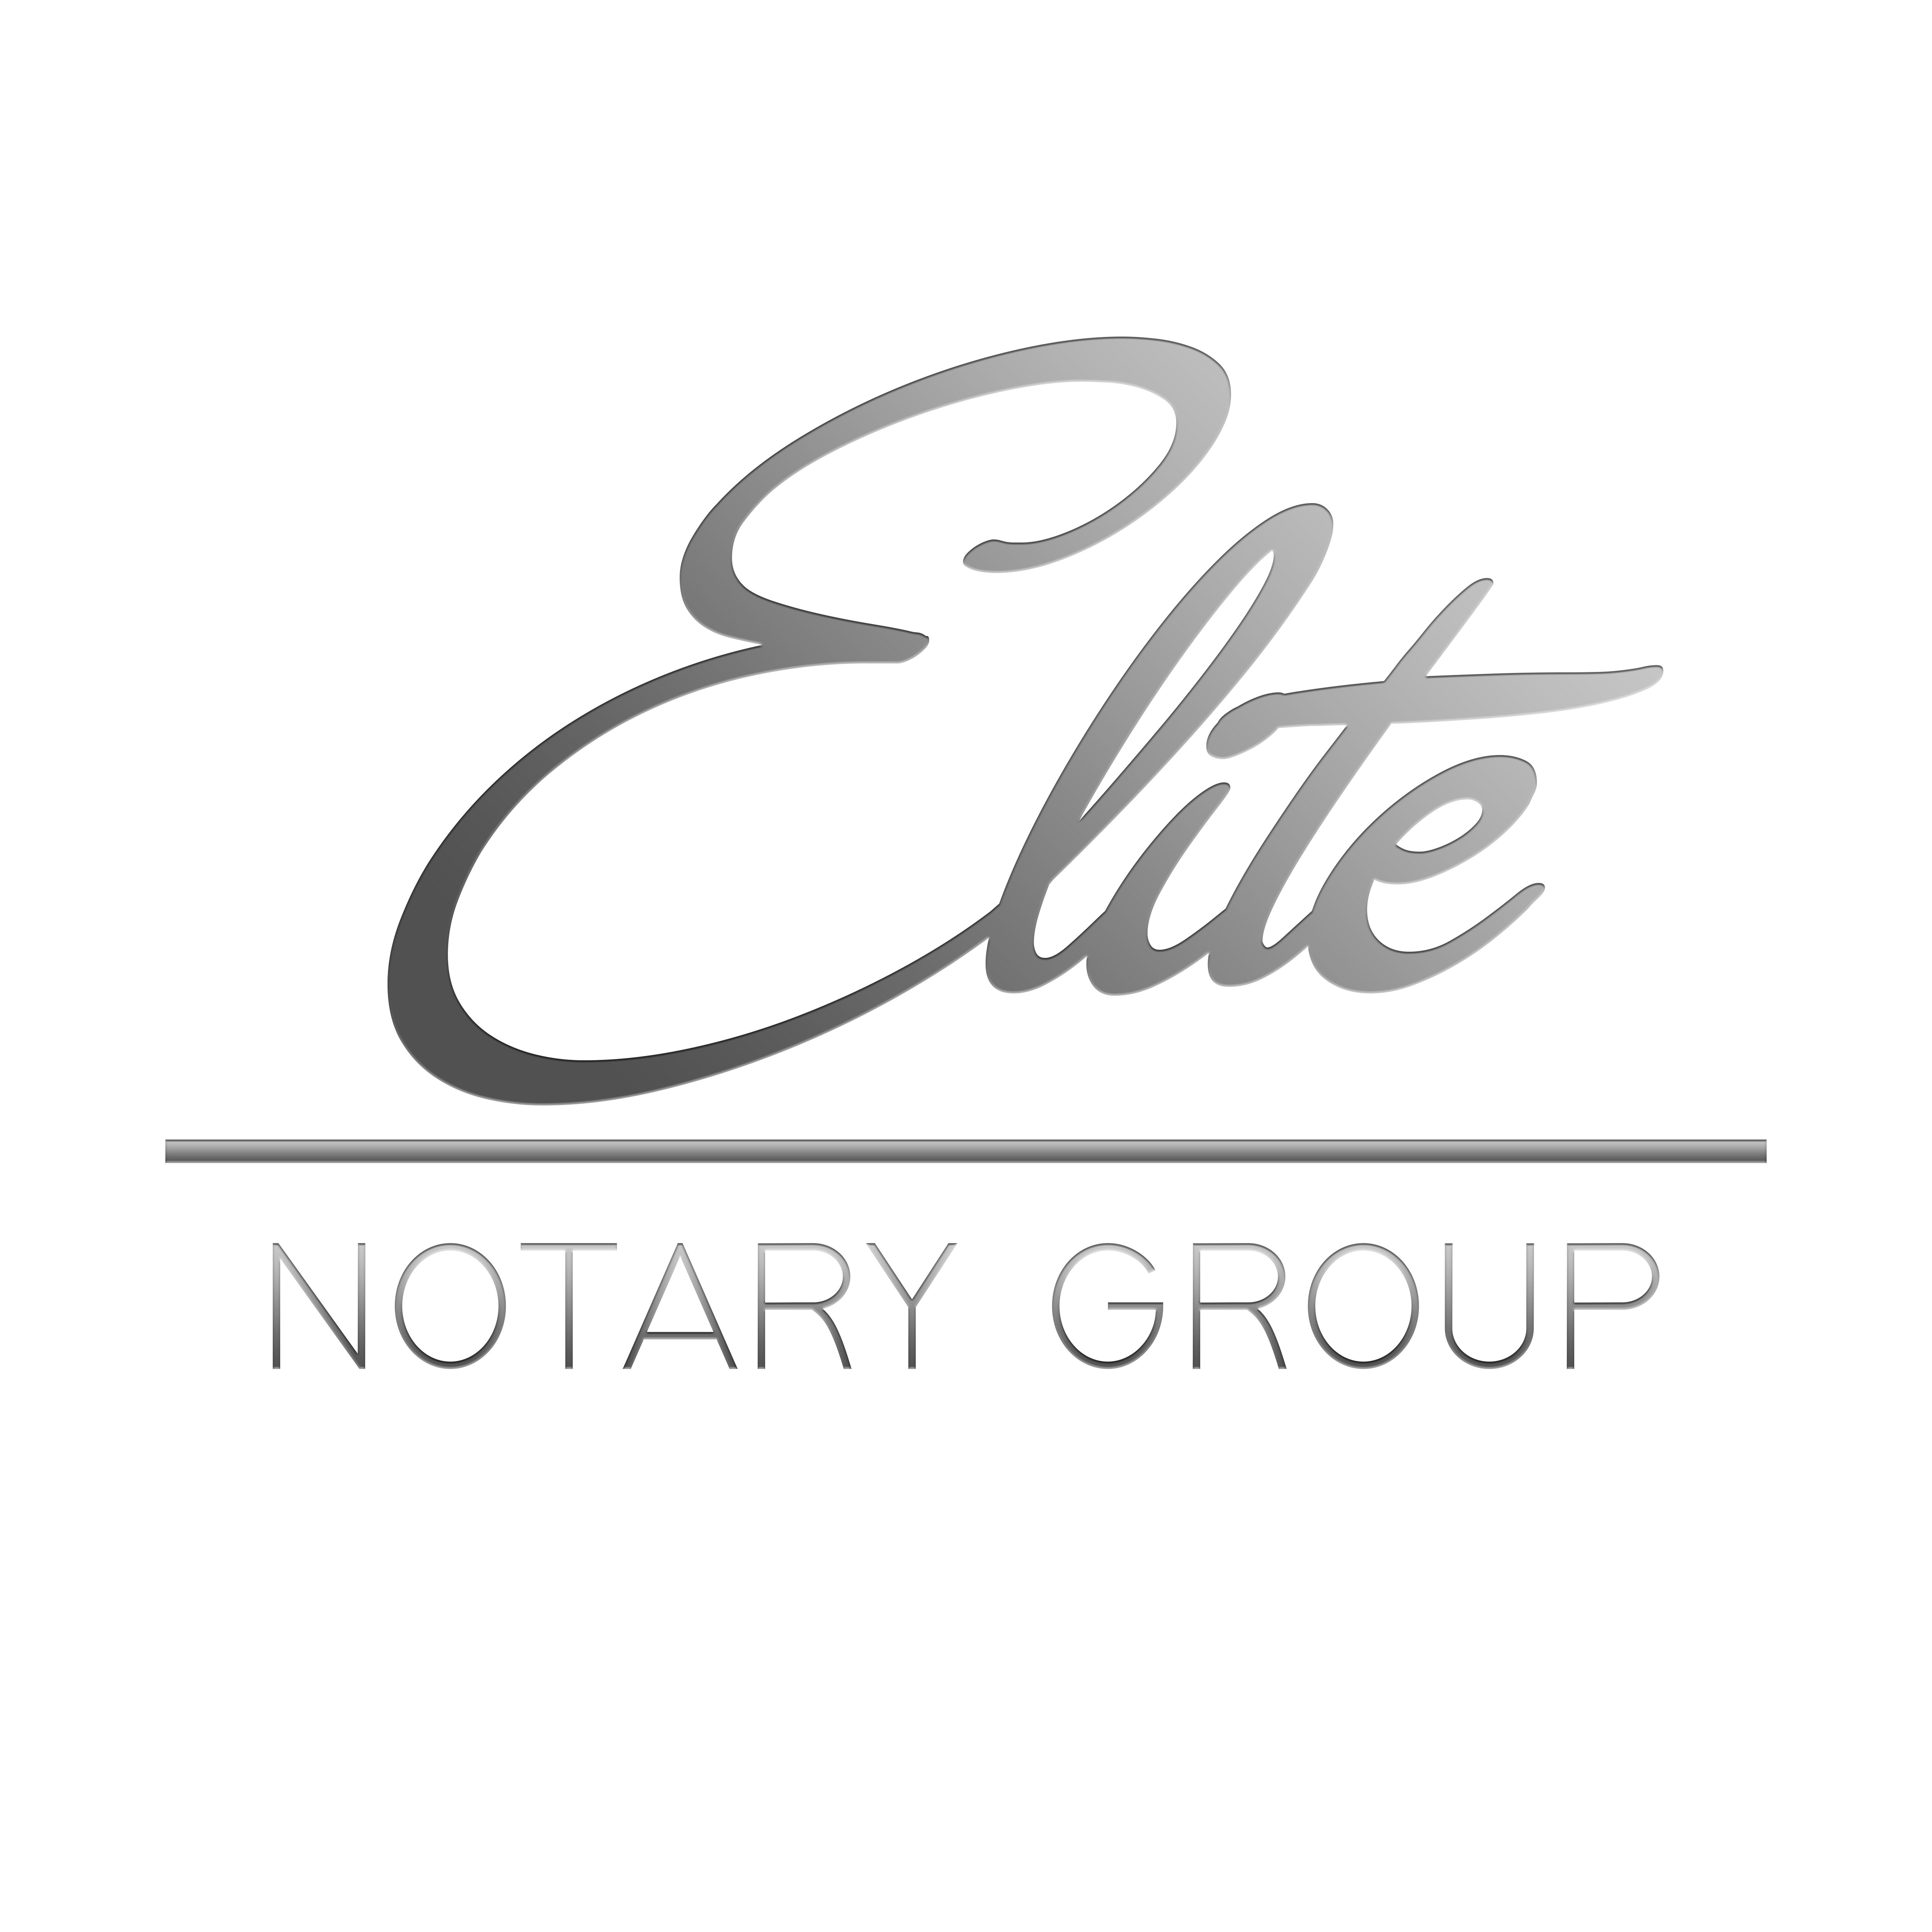 Administration Login Elite Notary Group